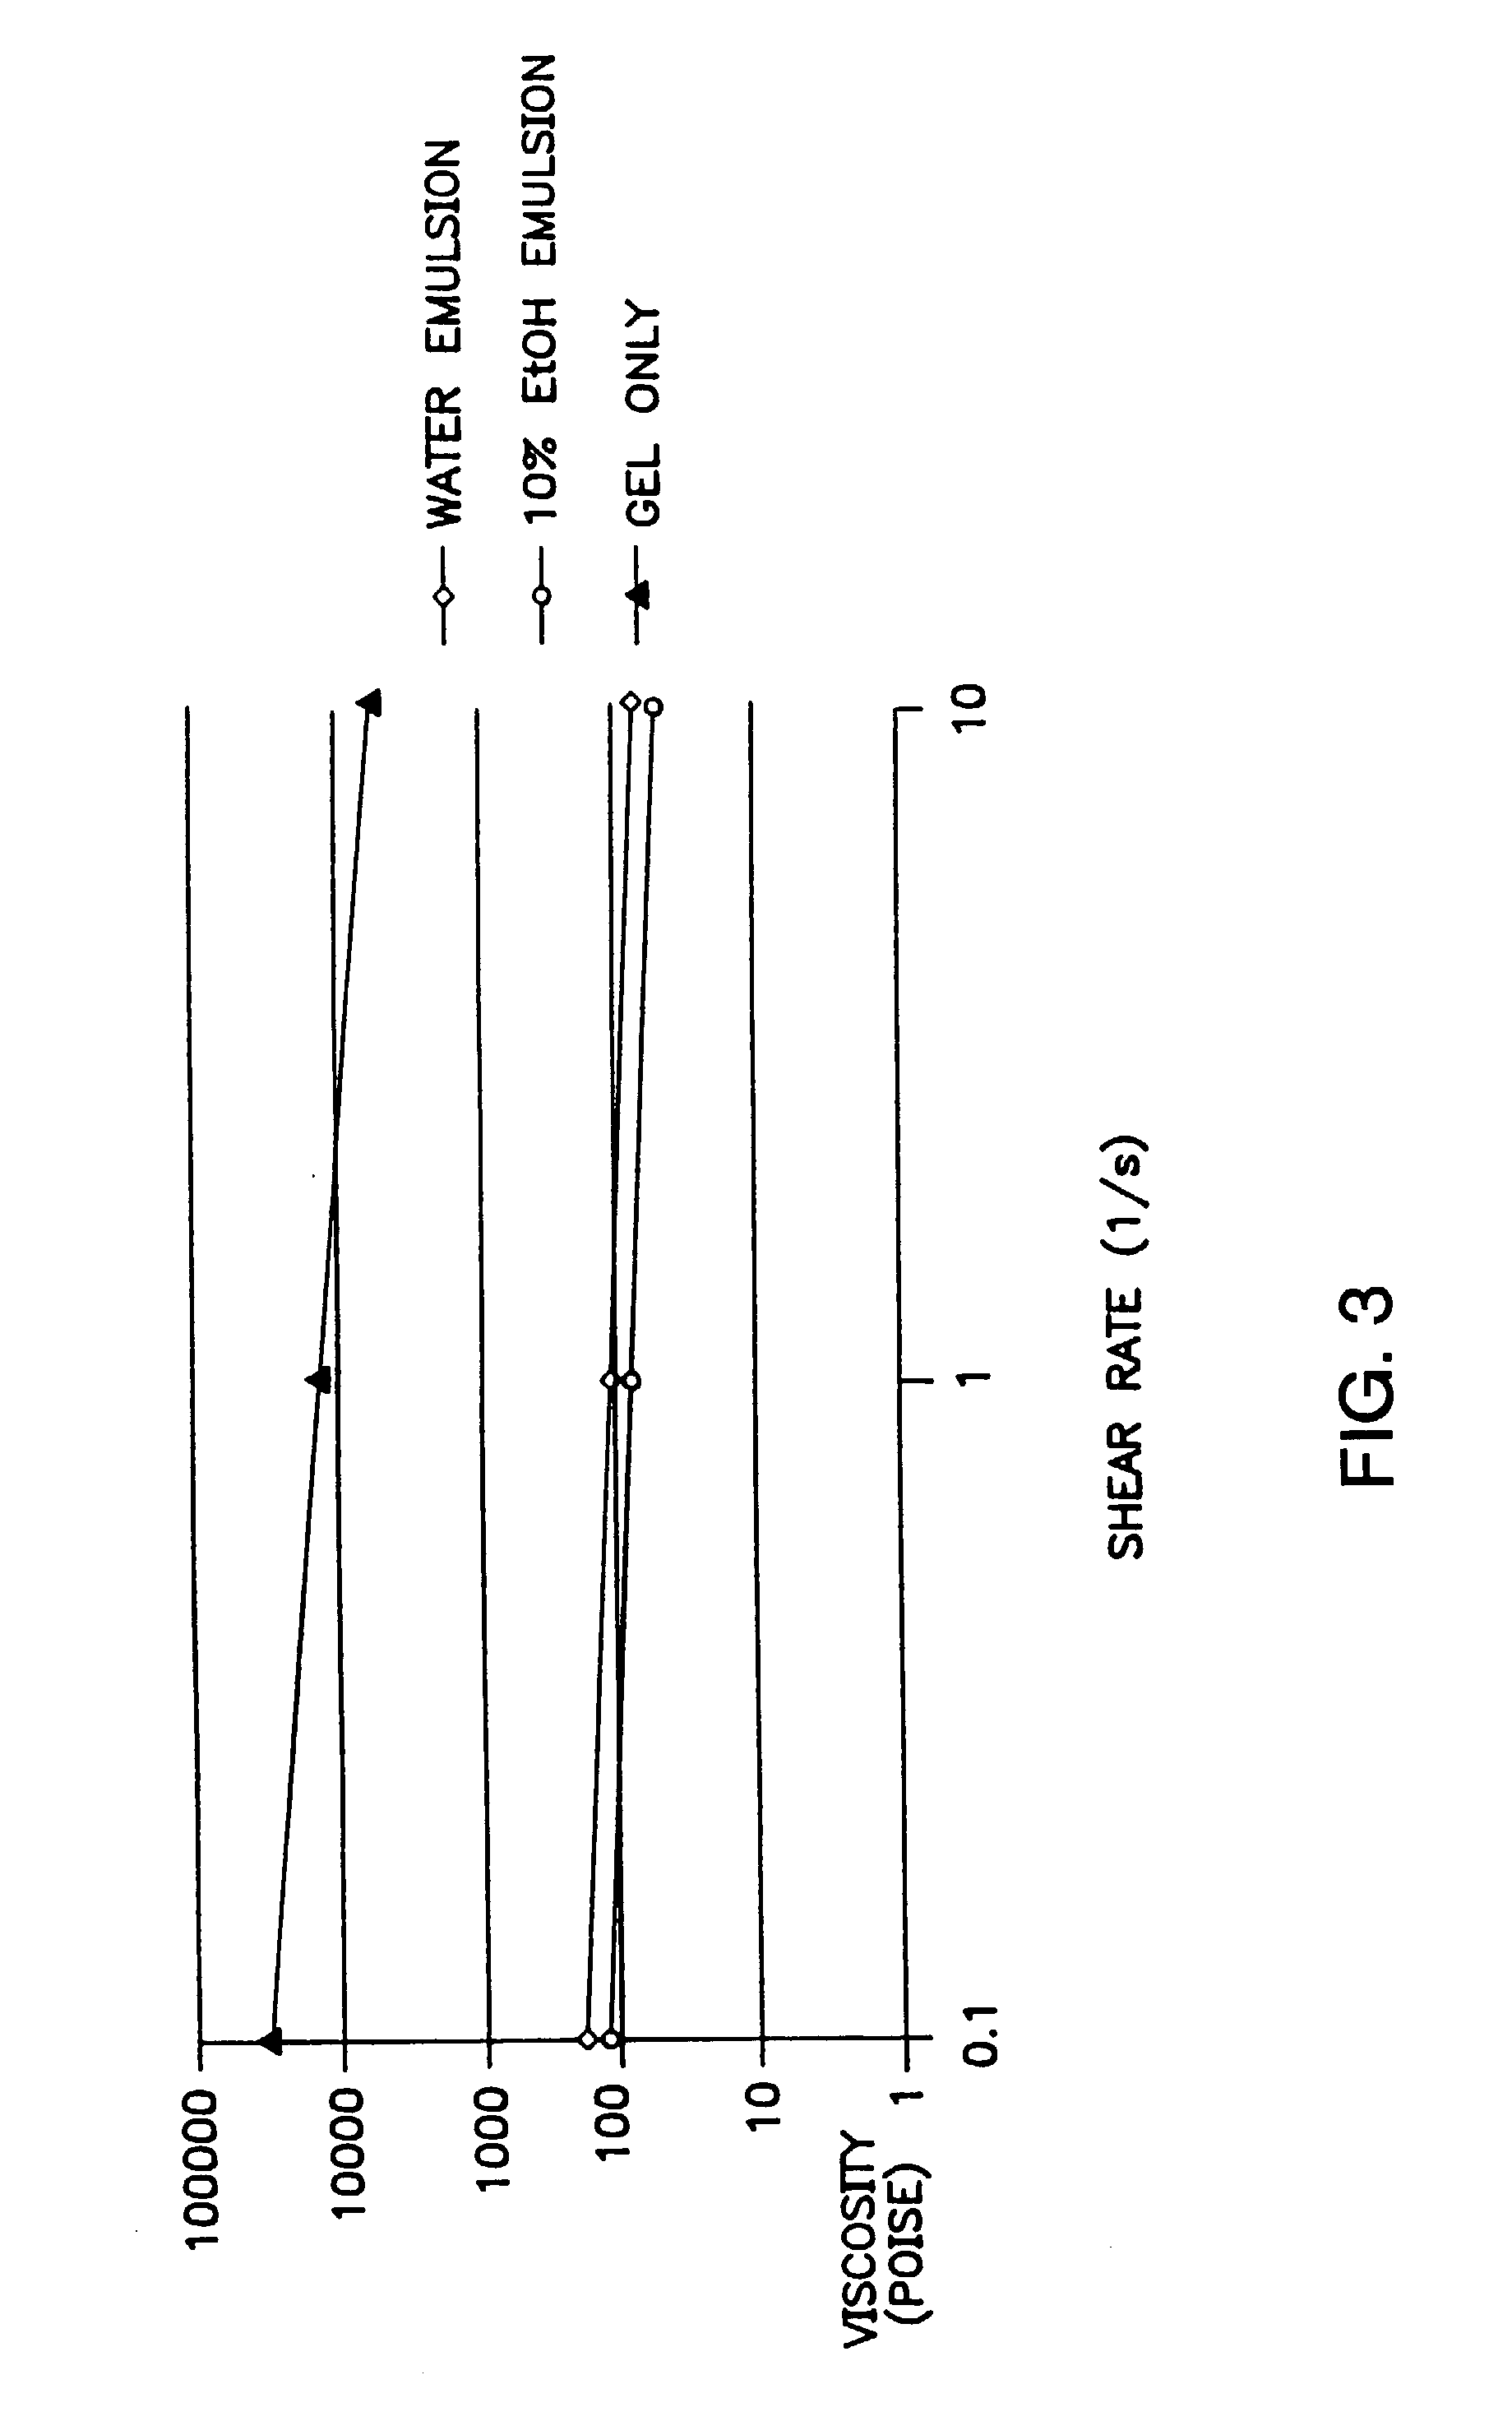 Gel composition and methods